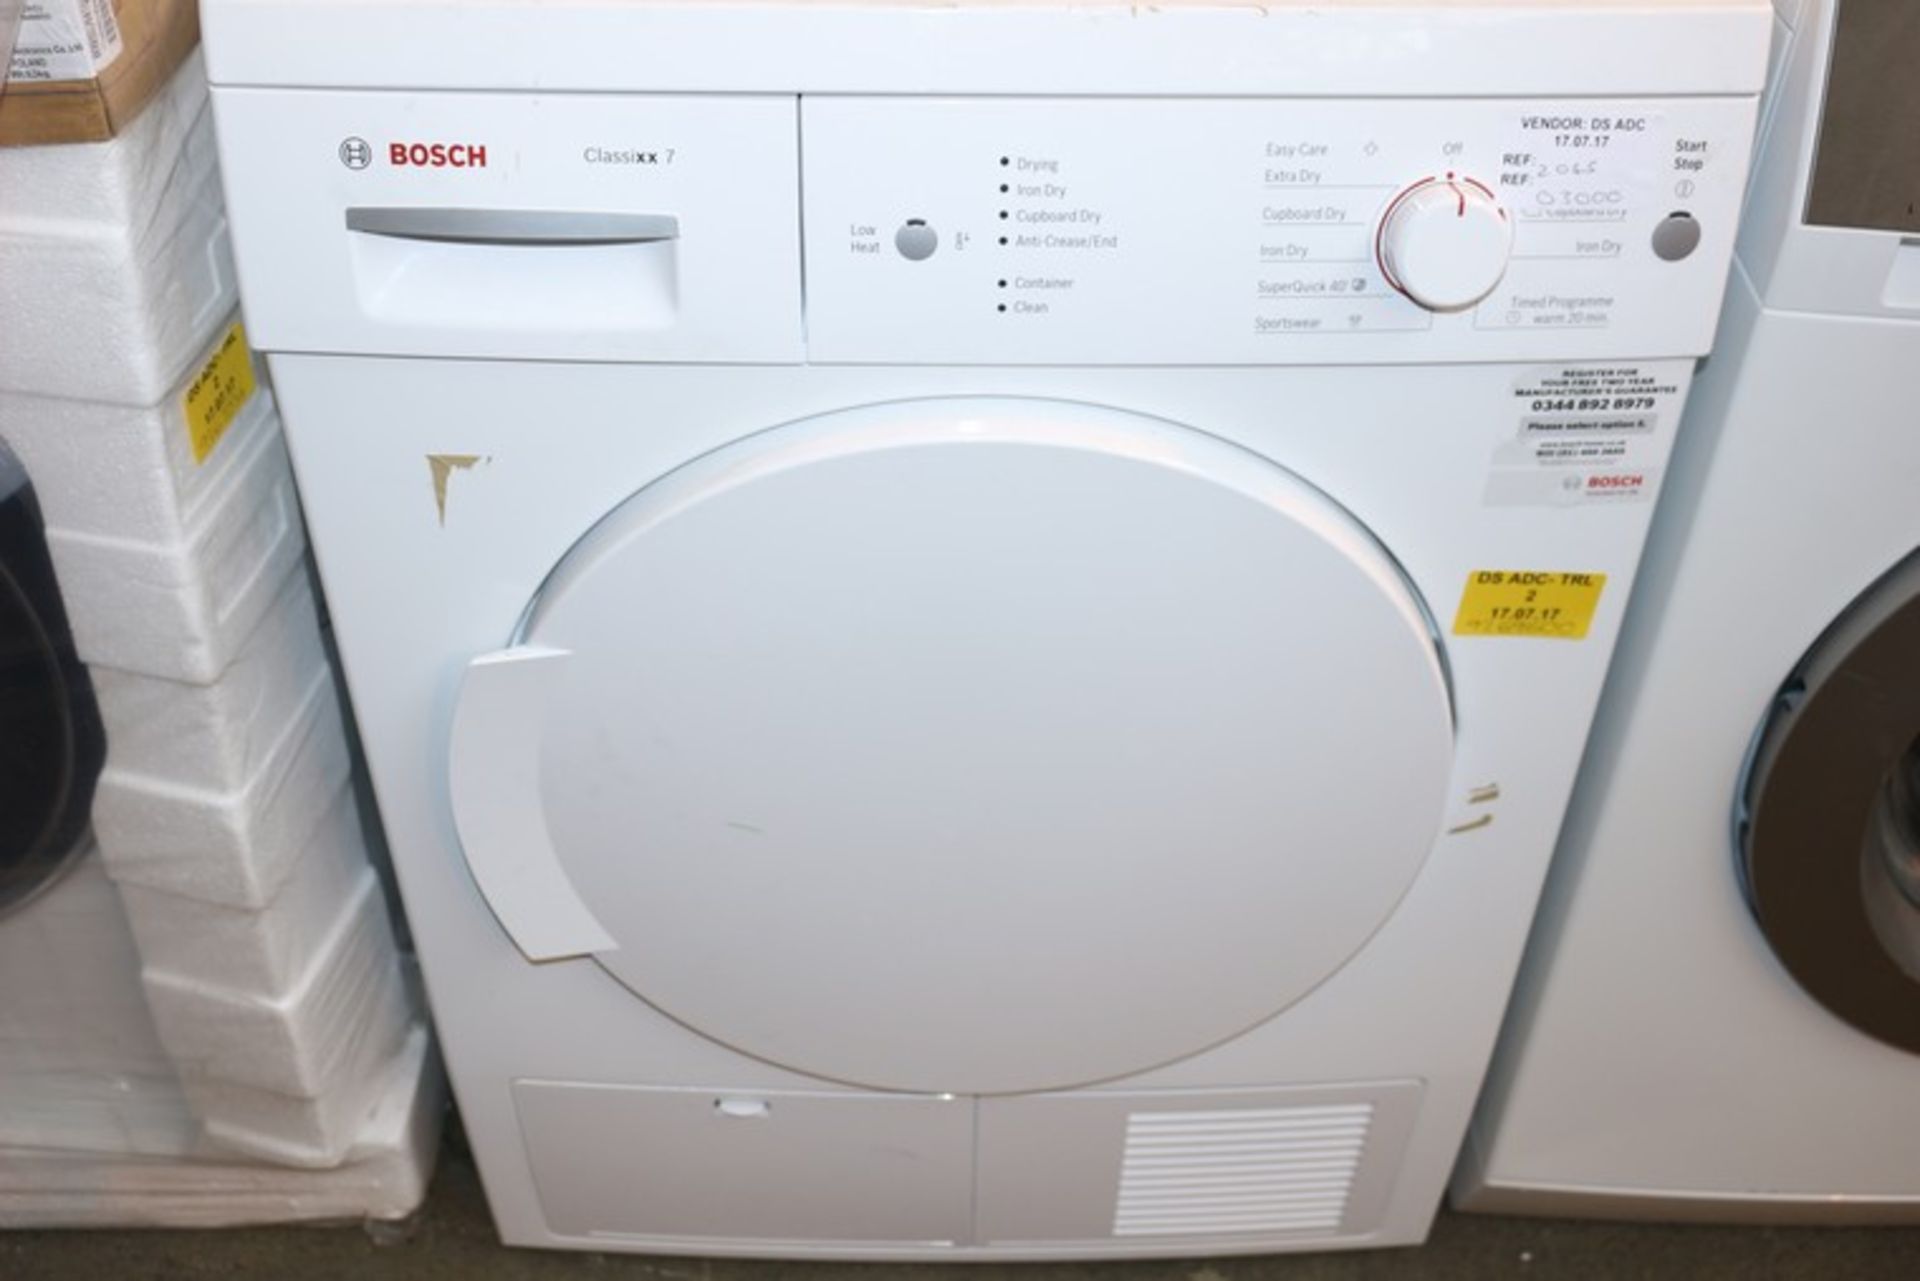 1 x BOSCH CLASSIC 7 WTE84106GB WASHER DRYER IN WHITE RRP £300 (2045)(17.7.17) *PLEASE NOTE THAT